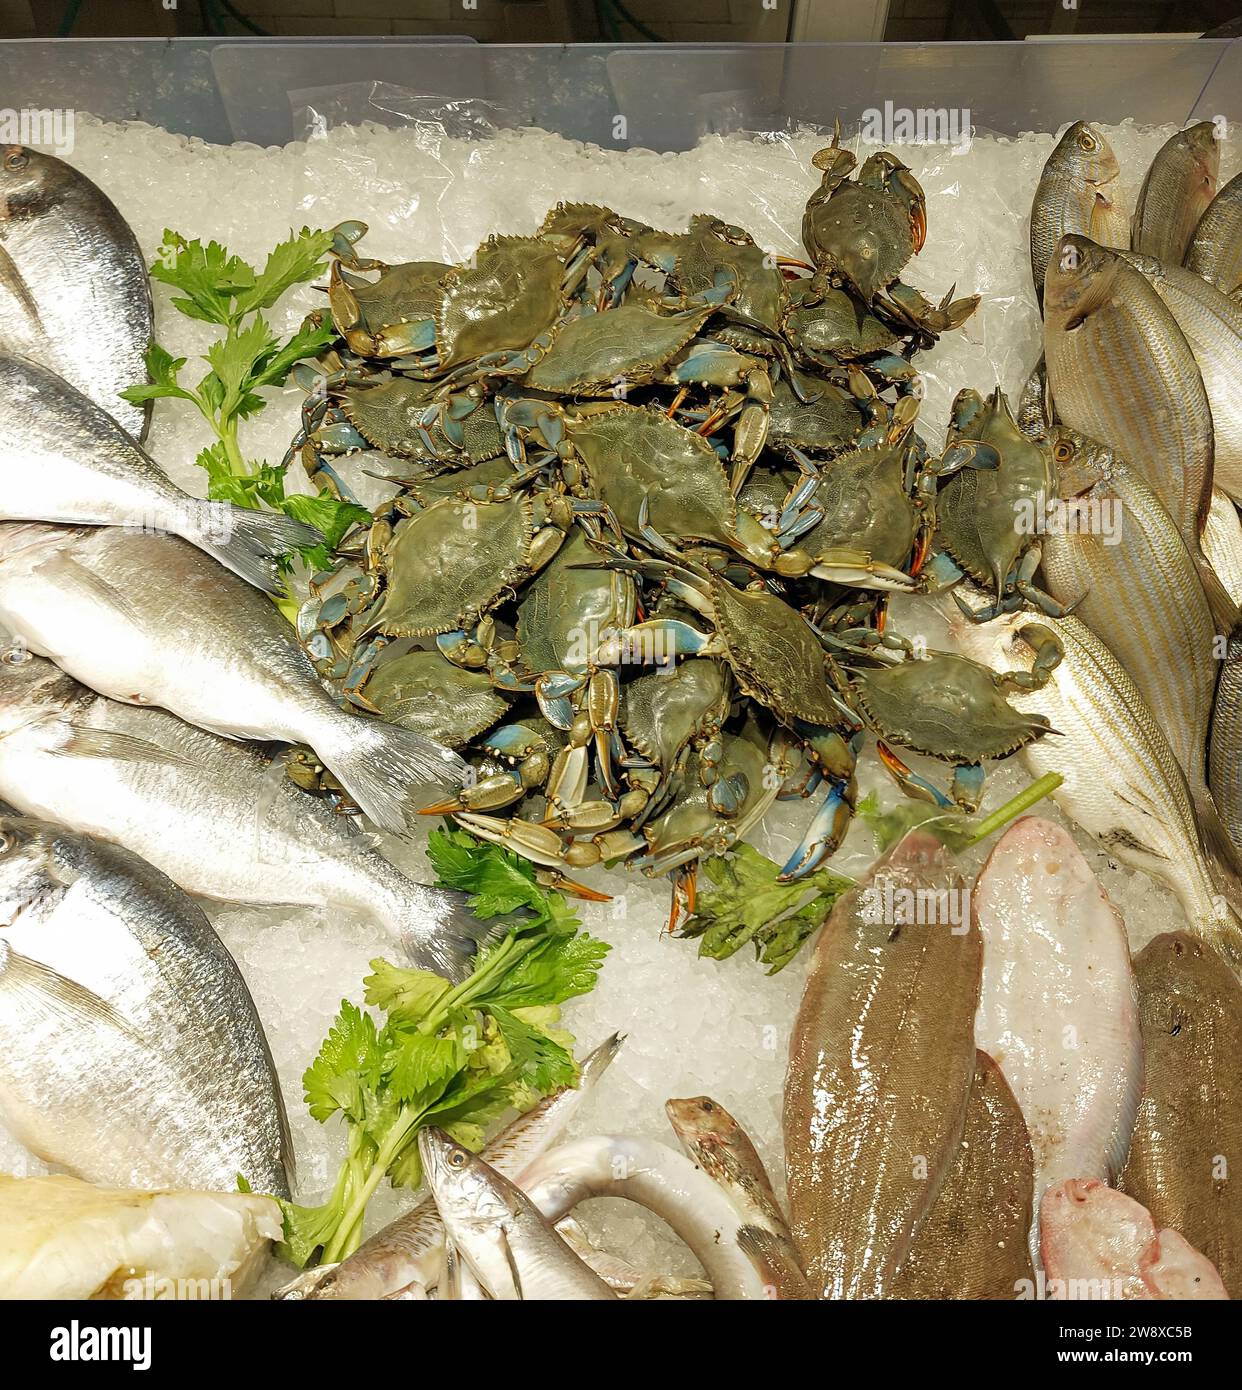 lots of very fresh blue crabs on the counter full of ice for sale in fish shops and more fish Stock Photo